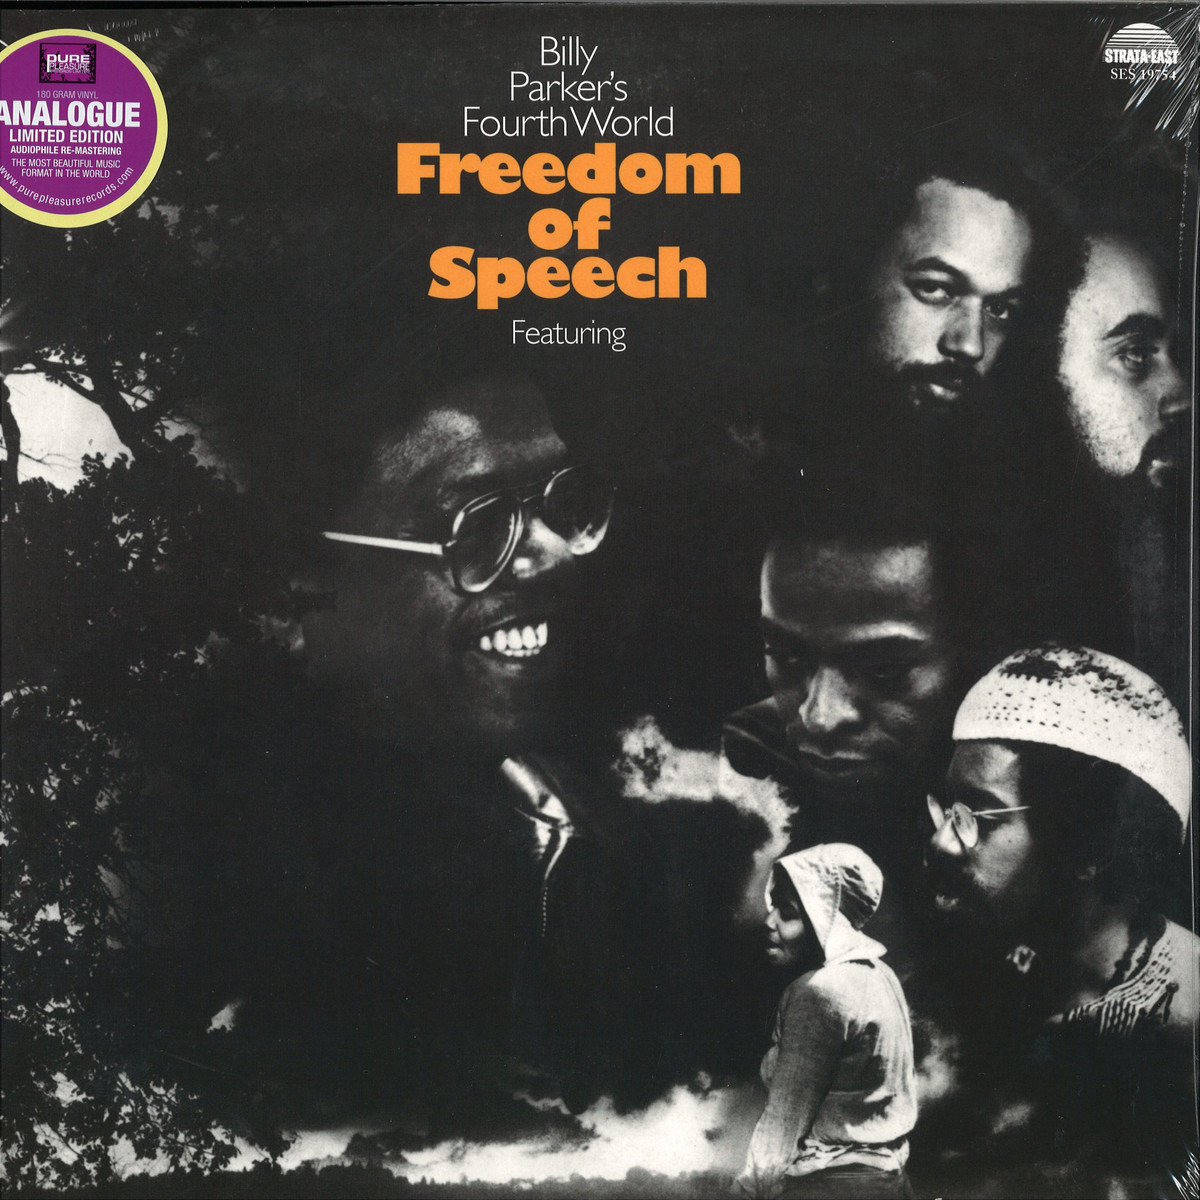 Billy Parker's Fourth World Freedom Of Speech Pure Pleasure Records  SES-19754 Vinyl